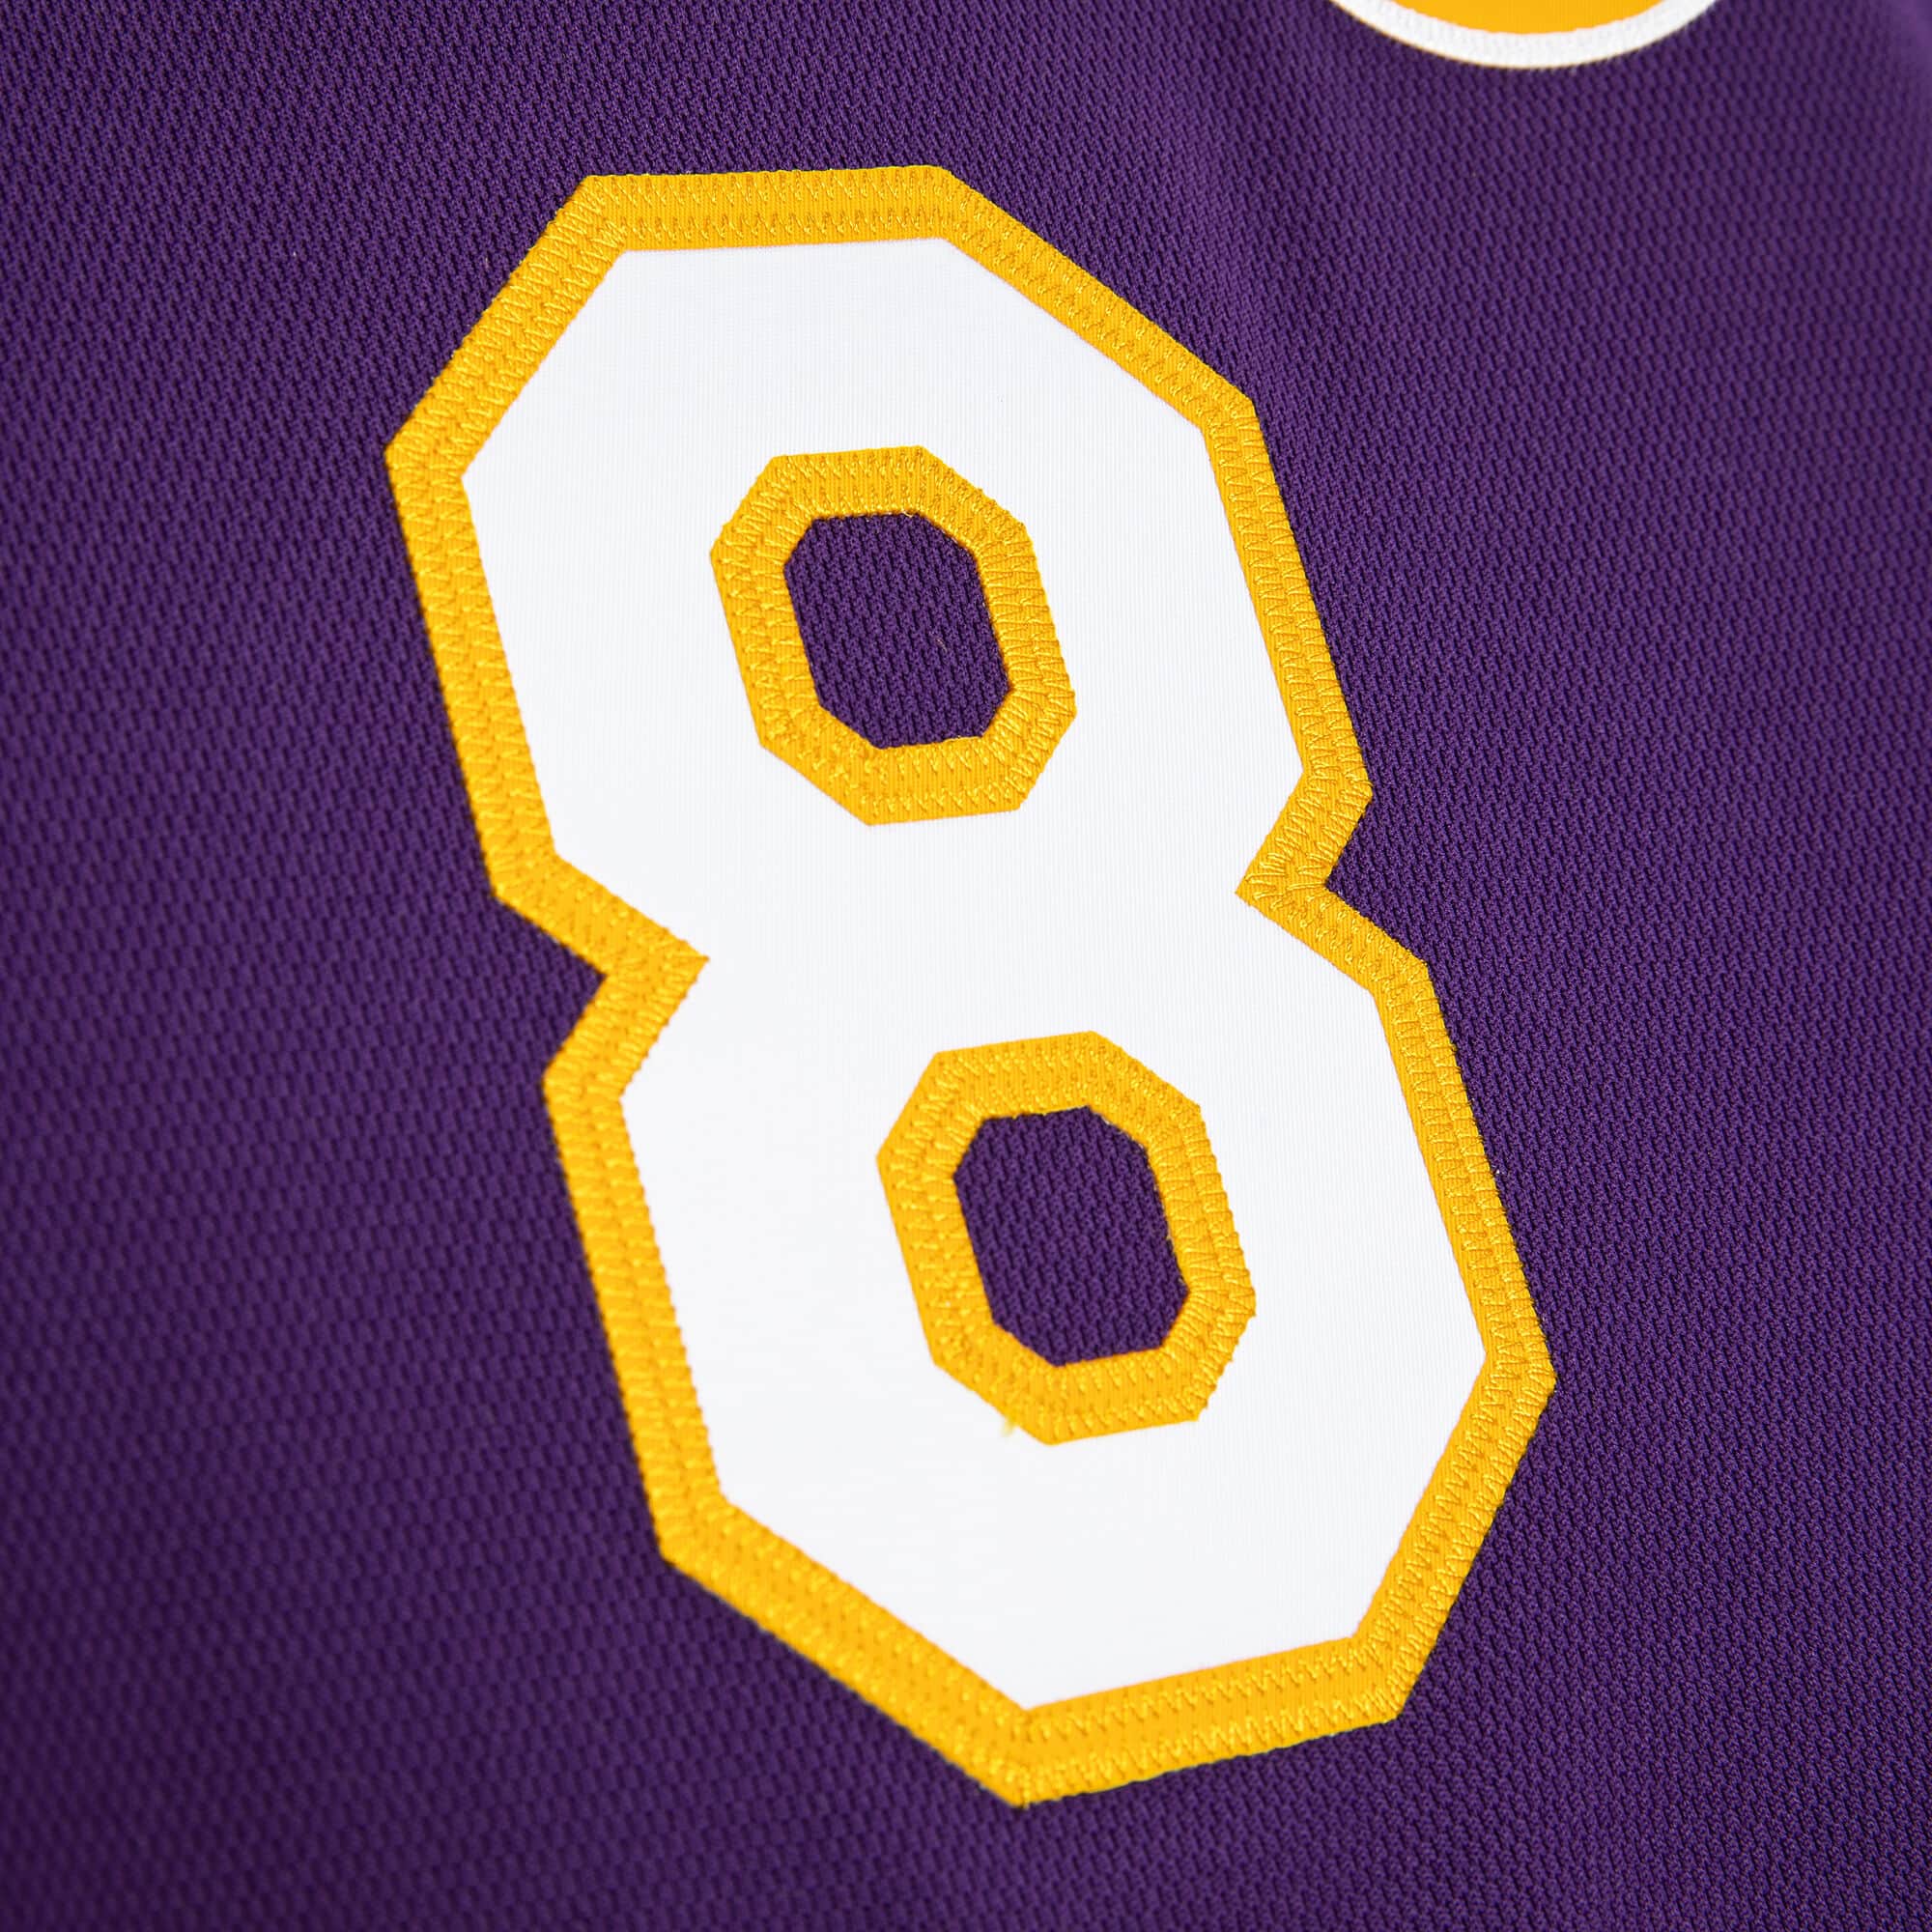 Mitchell &Ness Authentic Kobe Bryant Jersey Number 8 for Sale in